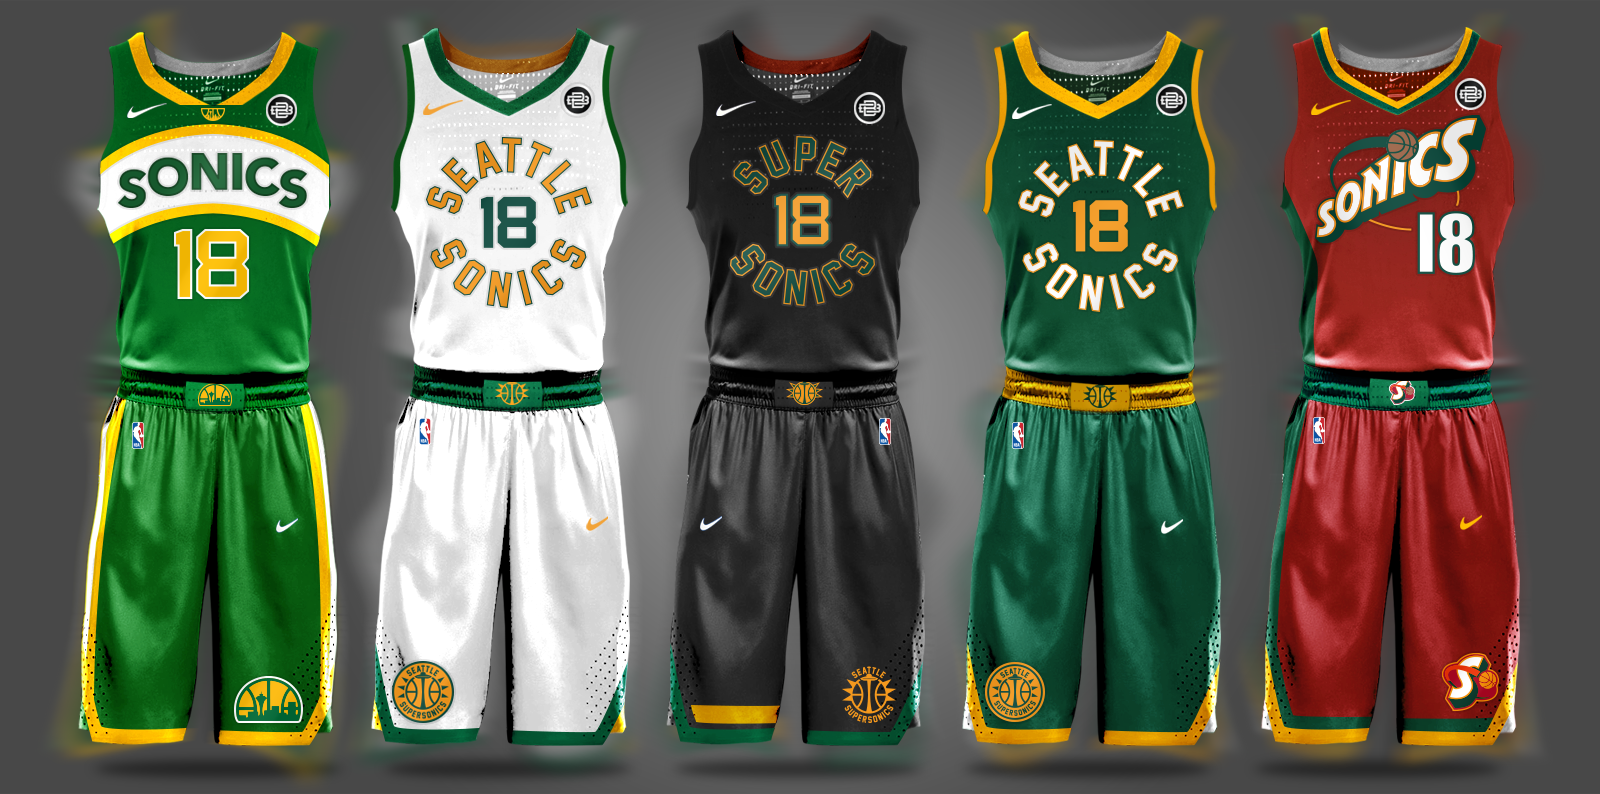 The 22 Amazing Jerseys Concepts For The NBA's Together For Change  Movement - Fadeaway World